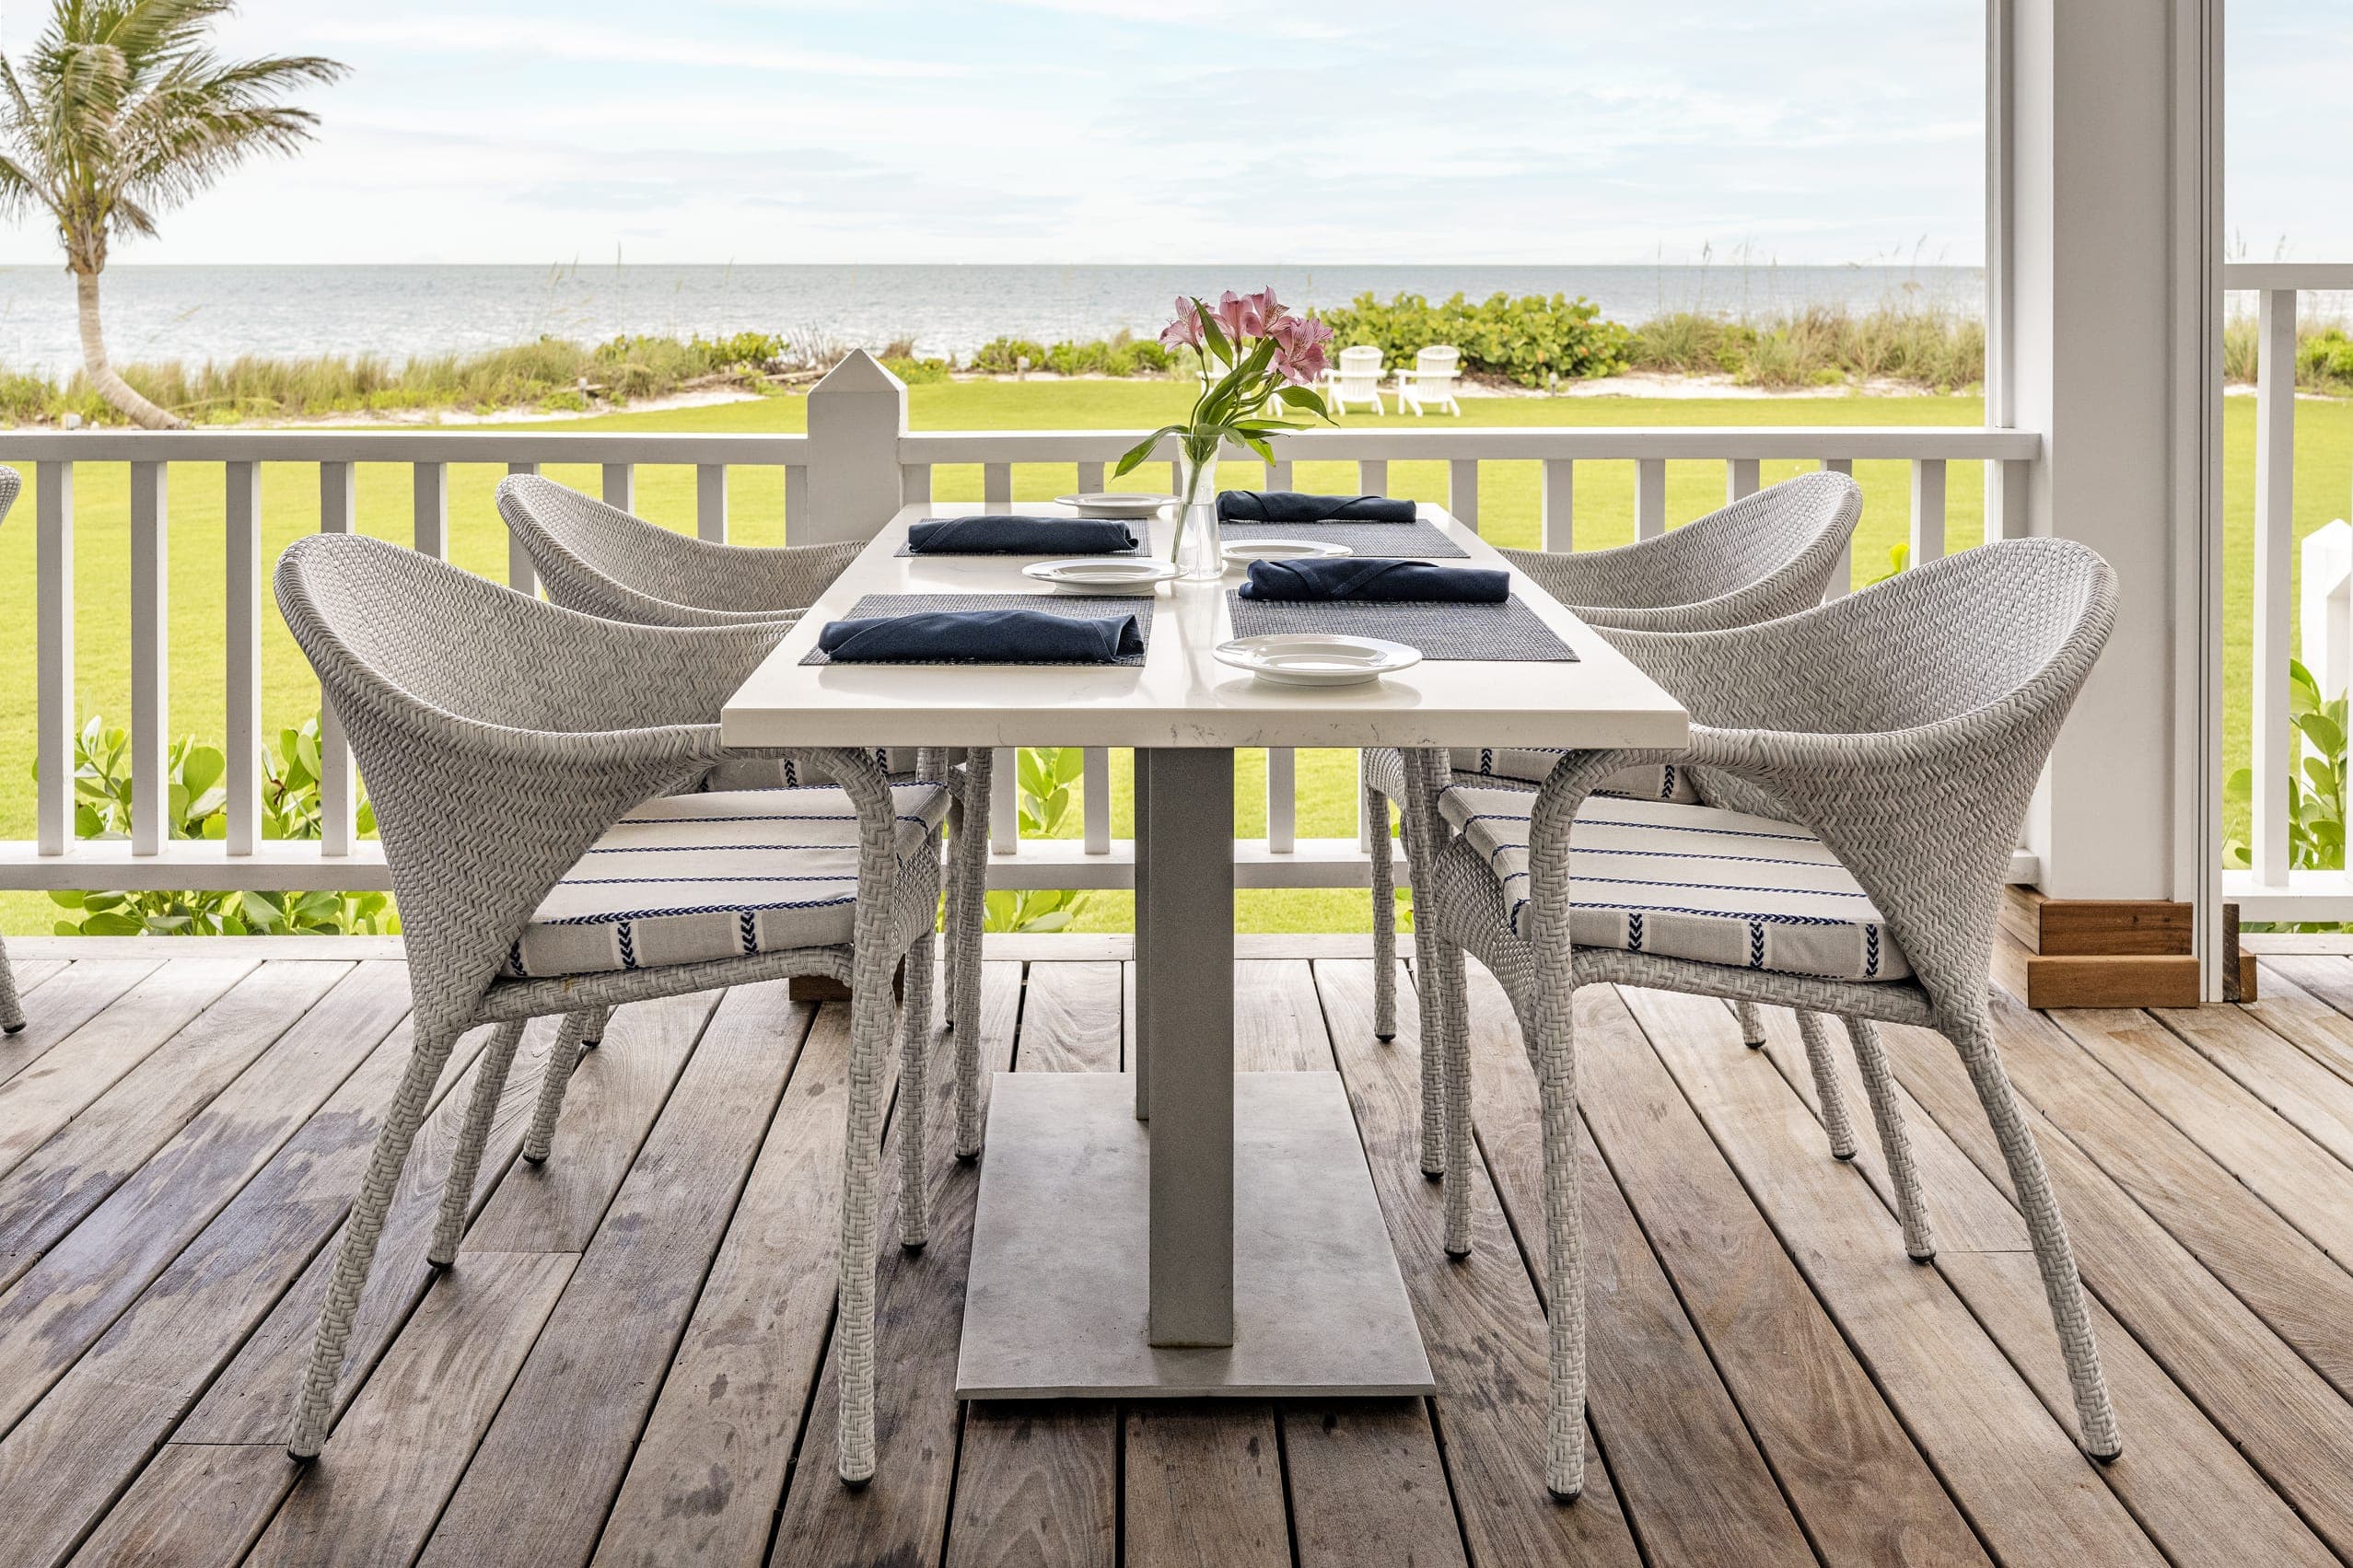 White Wicker Chairs Outside Dining Table Dark Blue Napkin Sea View